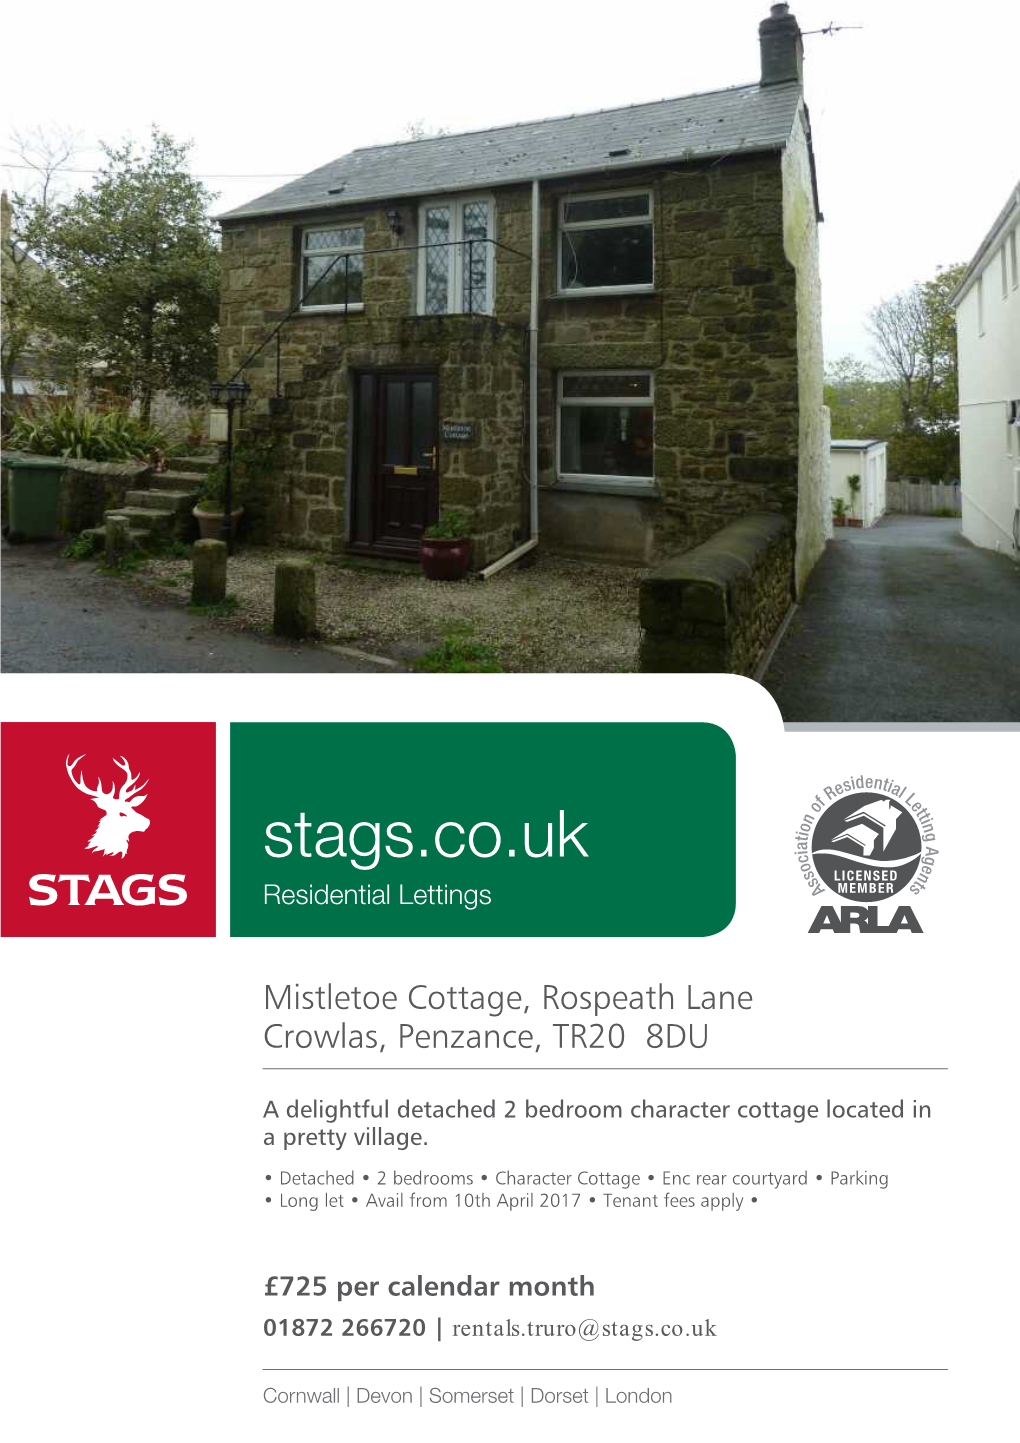 Stags.Co.Uk Residential Lettings